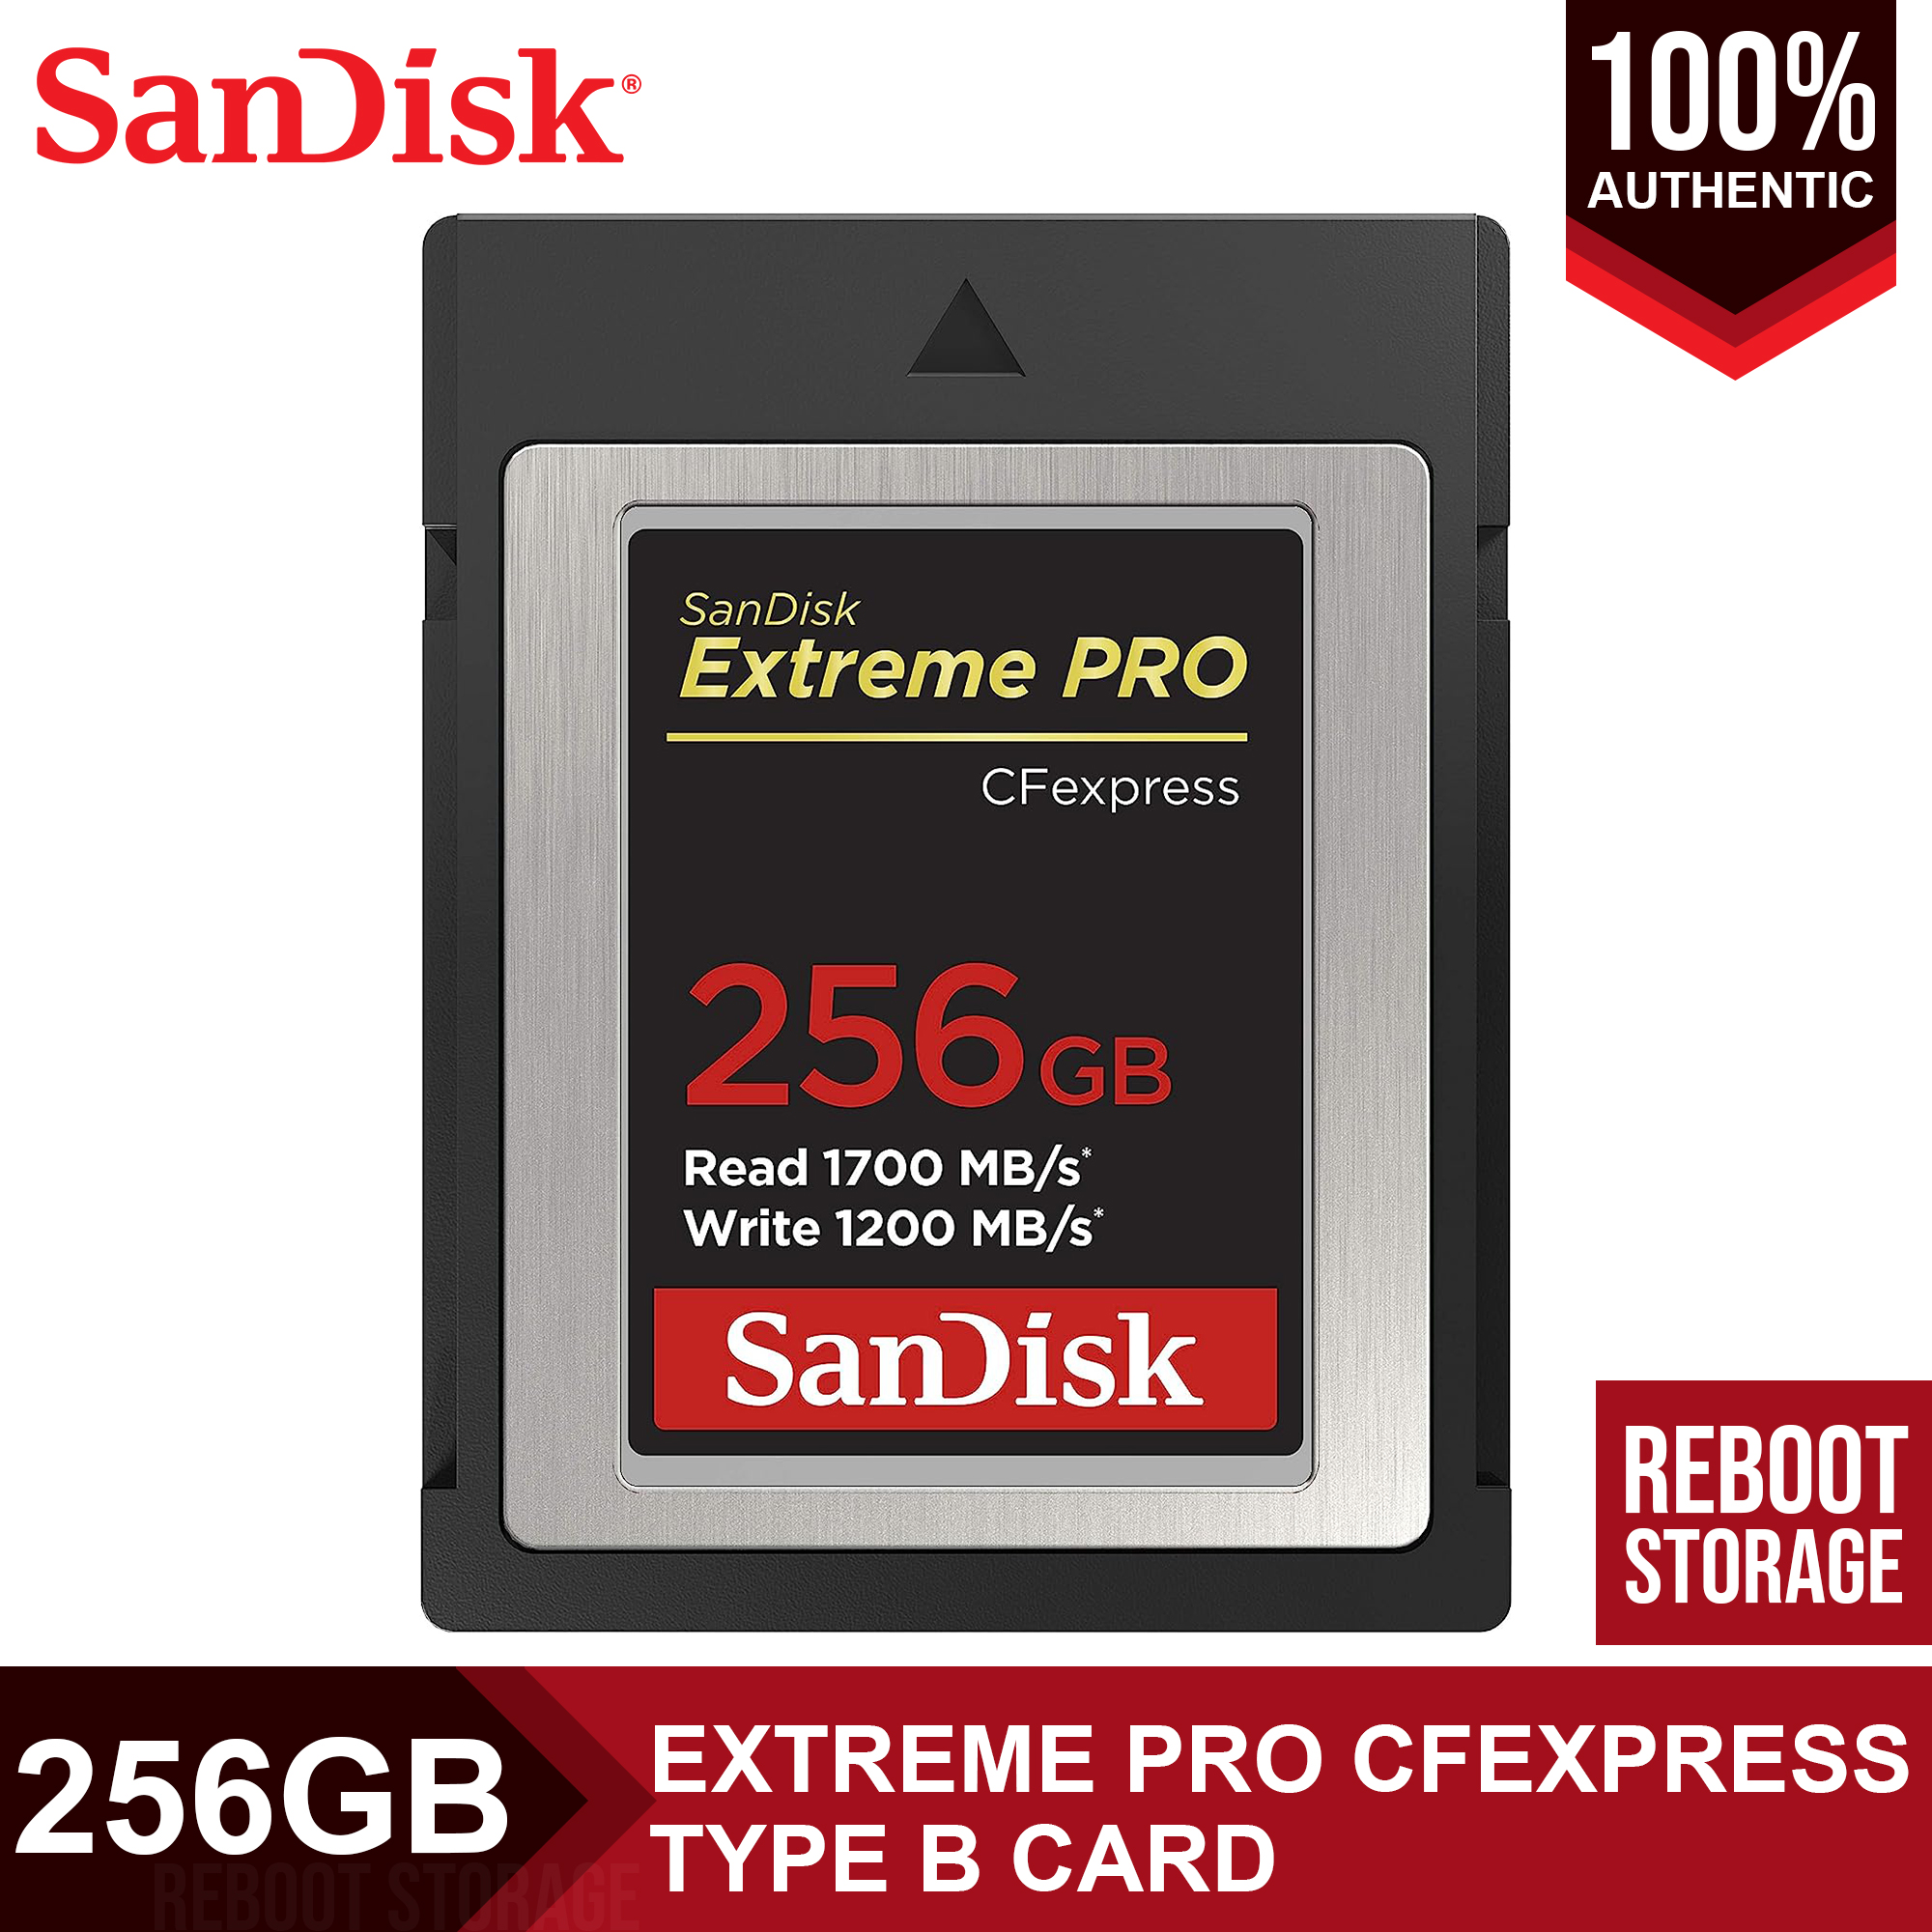 SanDisk (サンディスク) Extreme PRO(R) ポータブル外付けSSD 最大転送